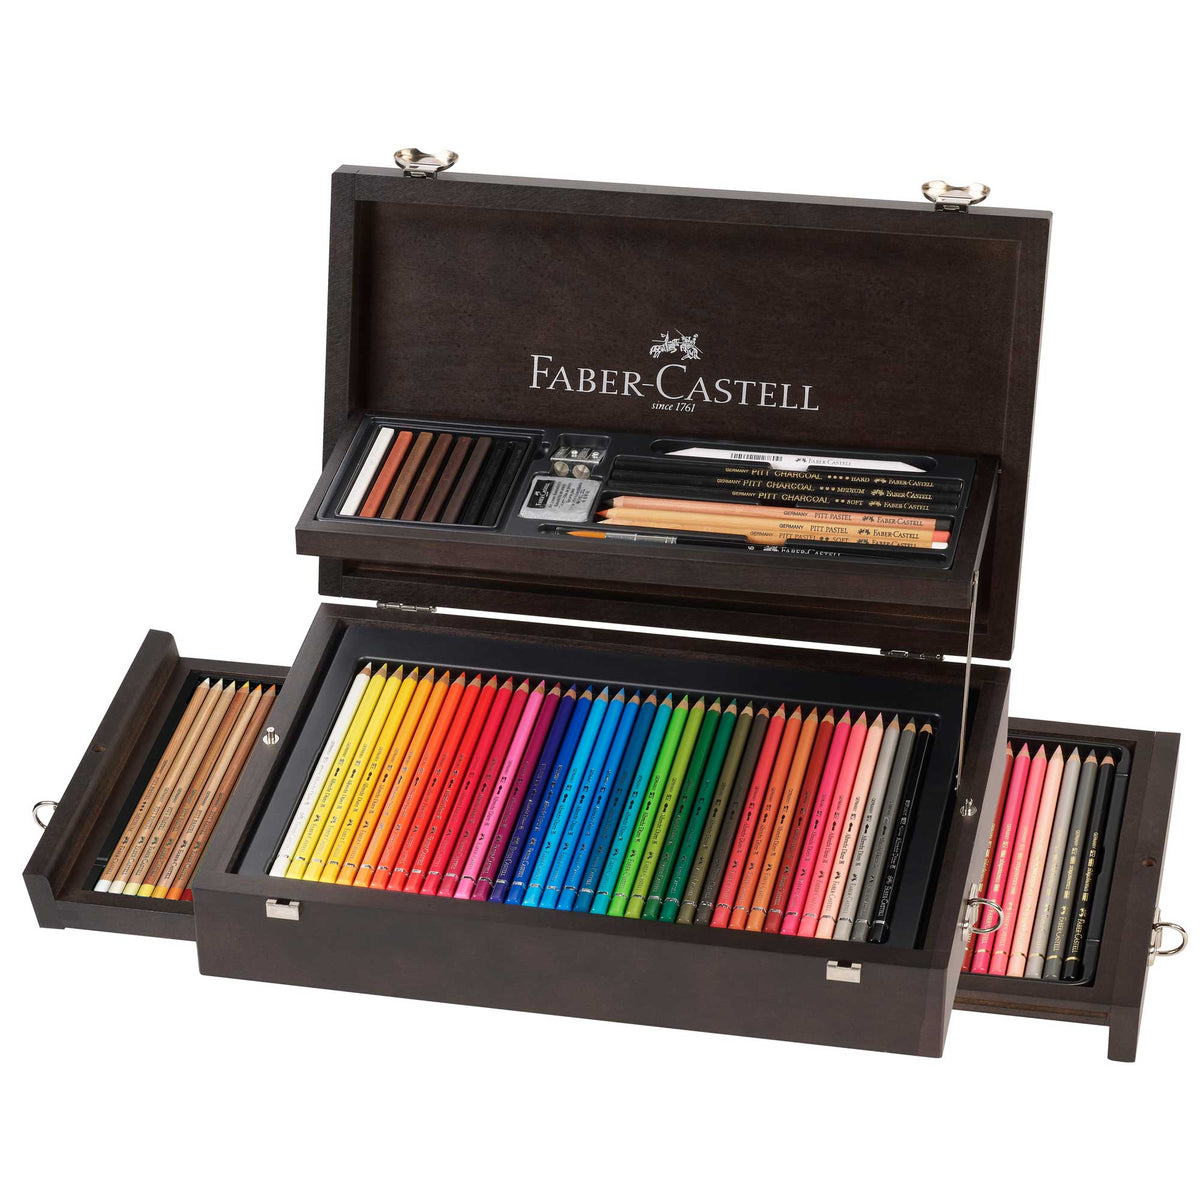 Faber-Castell Art &amp; Graphic Collection Wooden Case - 125 Pieces - Incl. FREE Artist&#39;s Apron